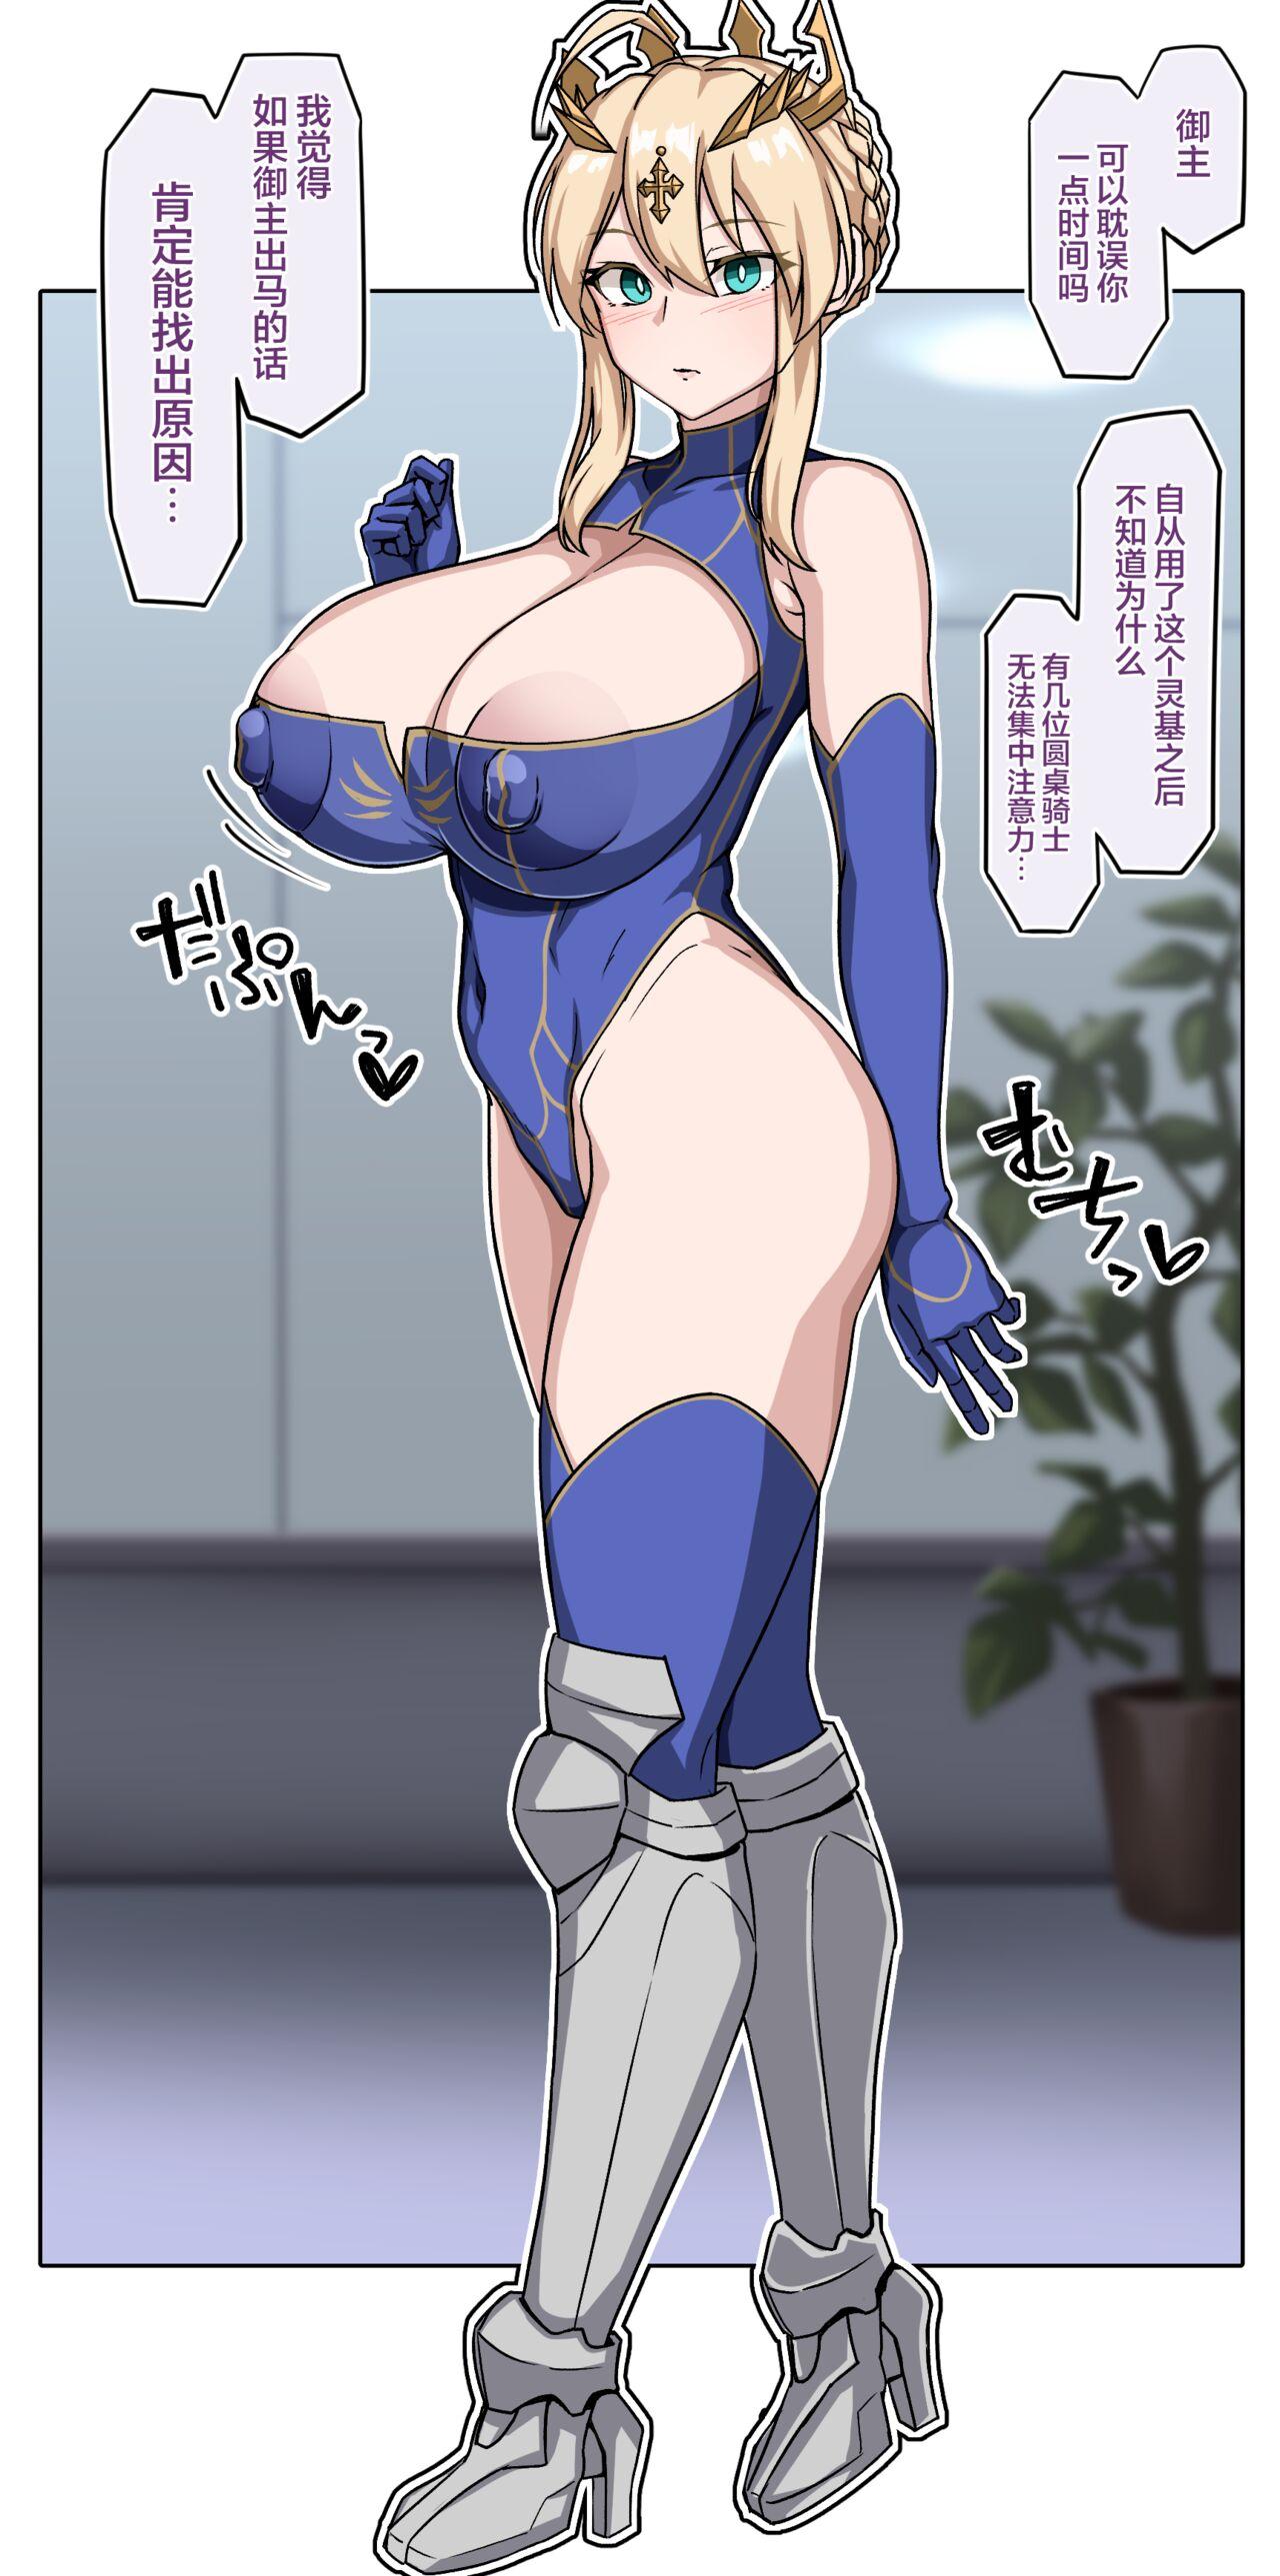 Leaked 乳上 - Fate grand order Fingering - Picture 2